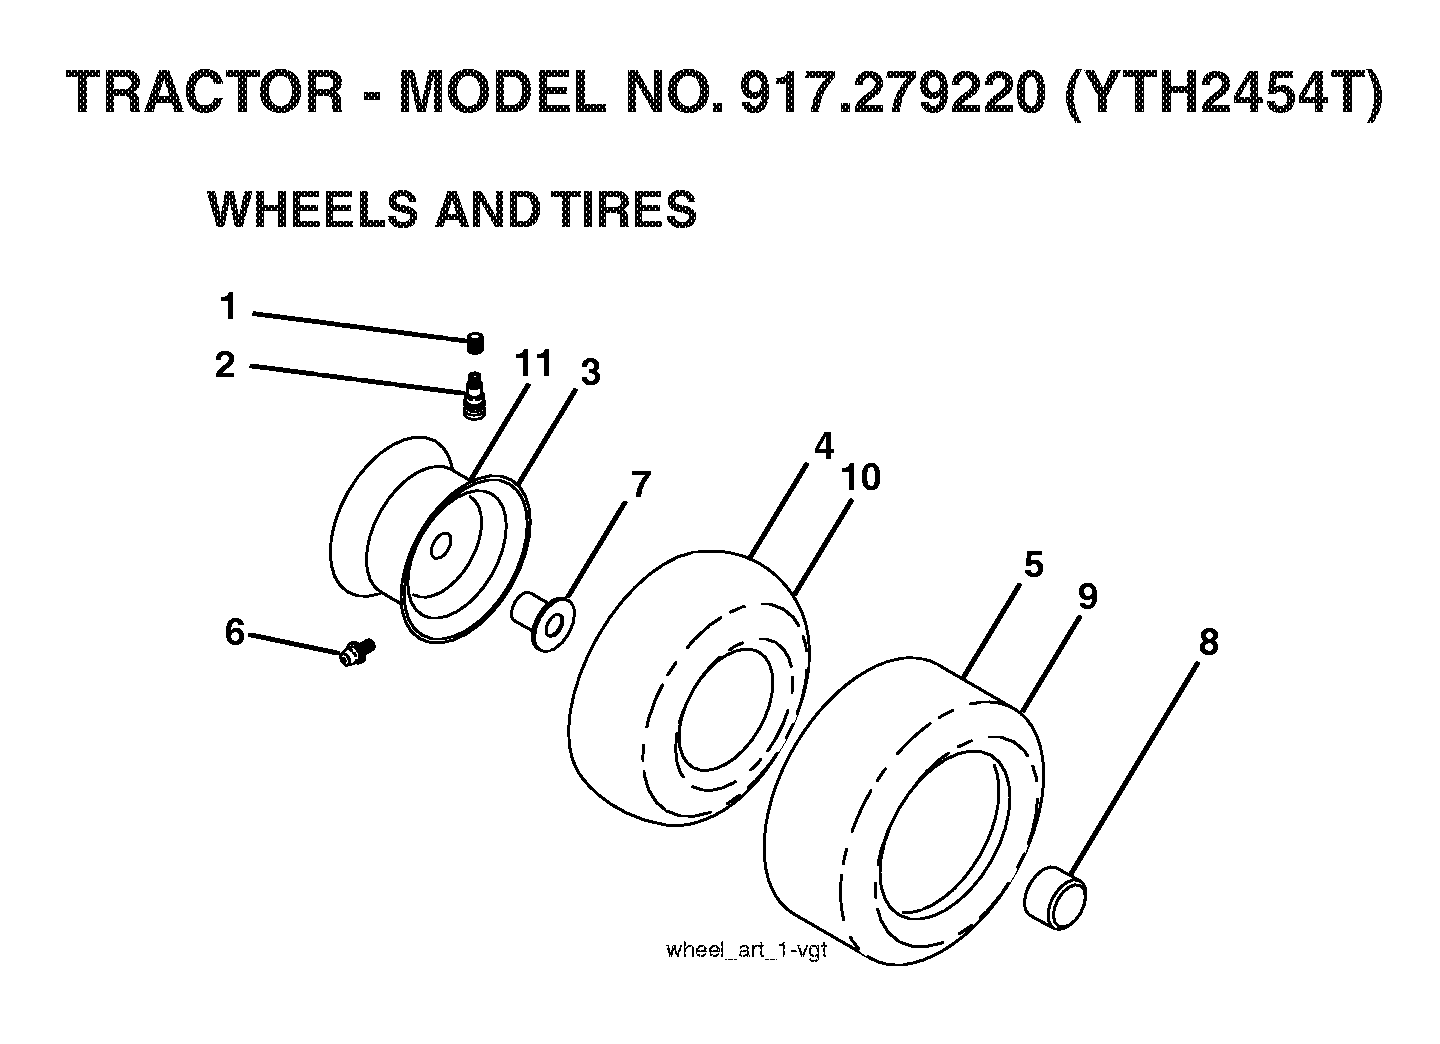 Wheels and tires 532059192, 532065139, 532106732, 532008134, 532122073, 532000278, 532009040, 532104757, 532125833, 532007154, 532106108, 576707201